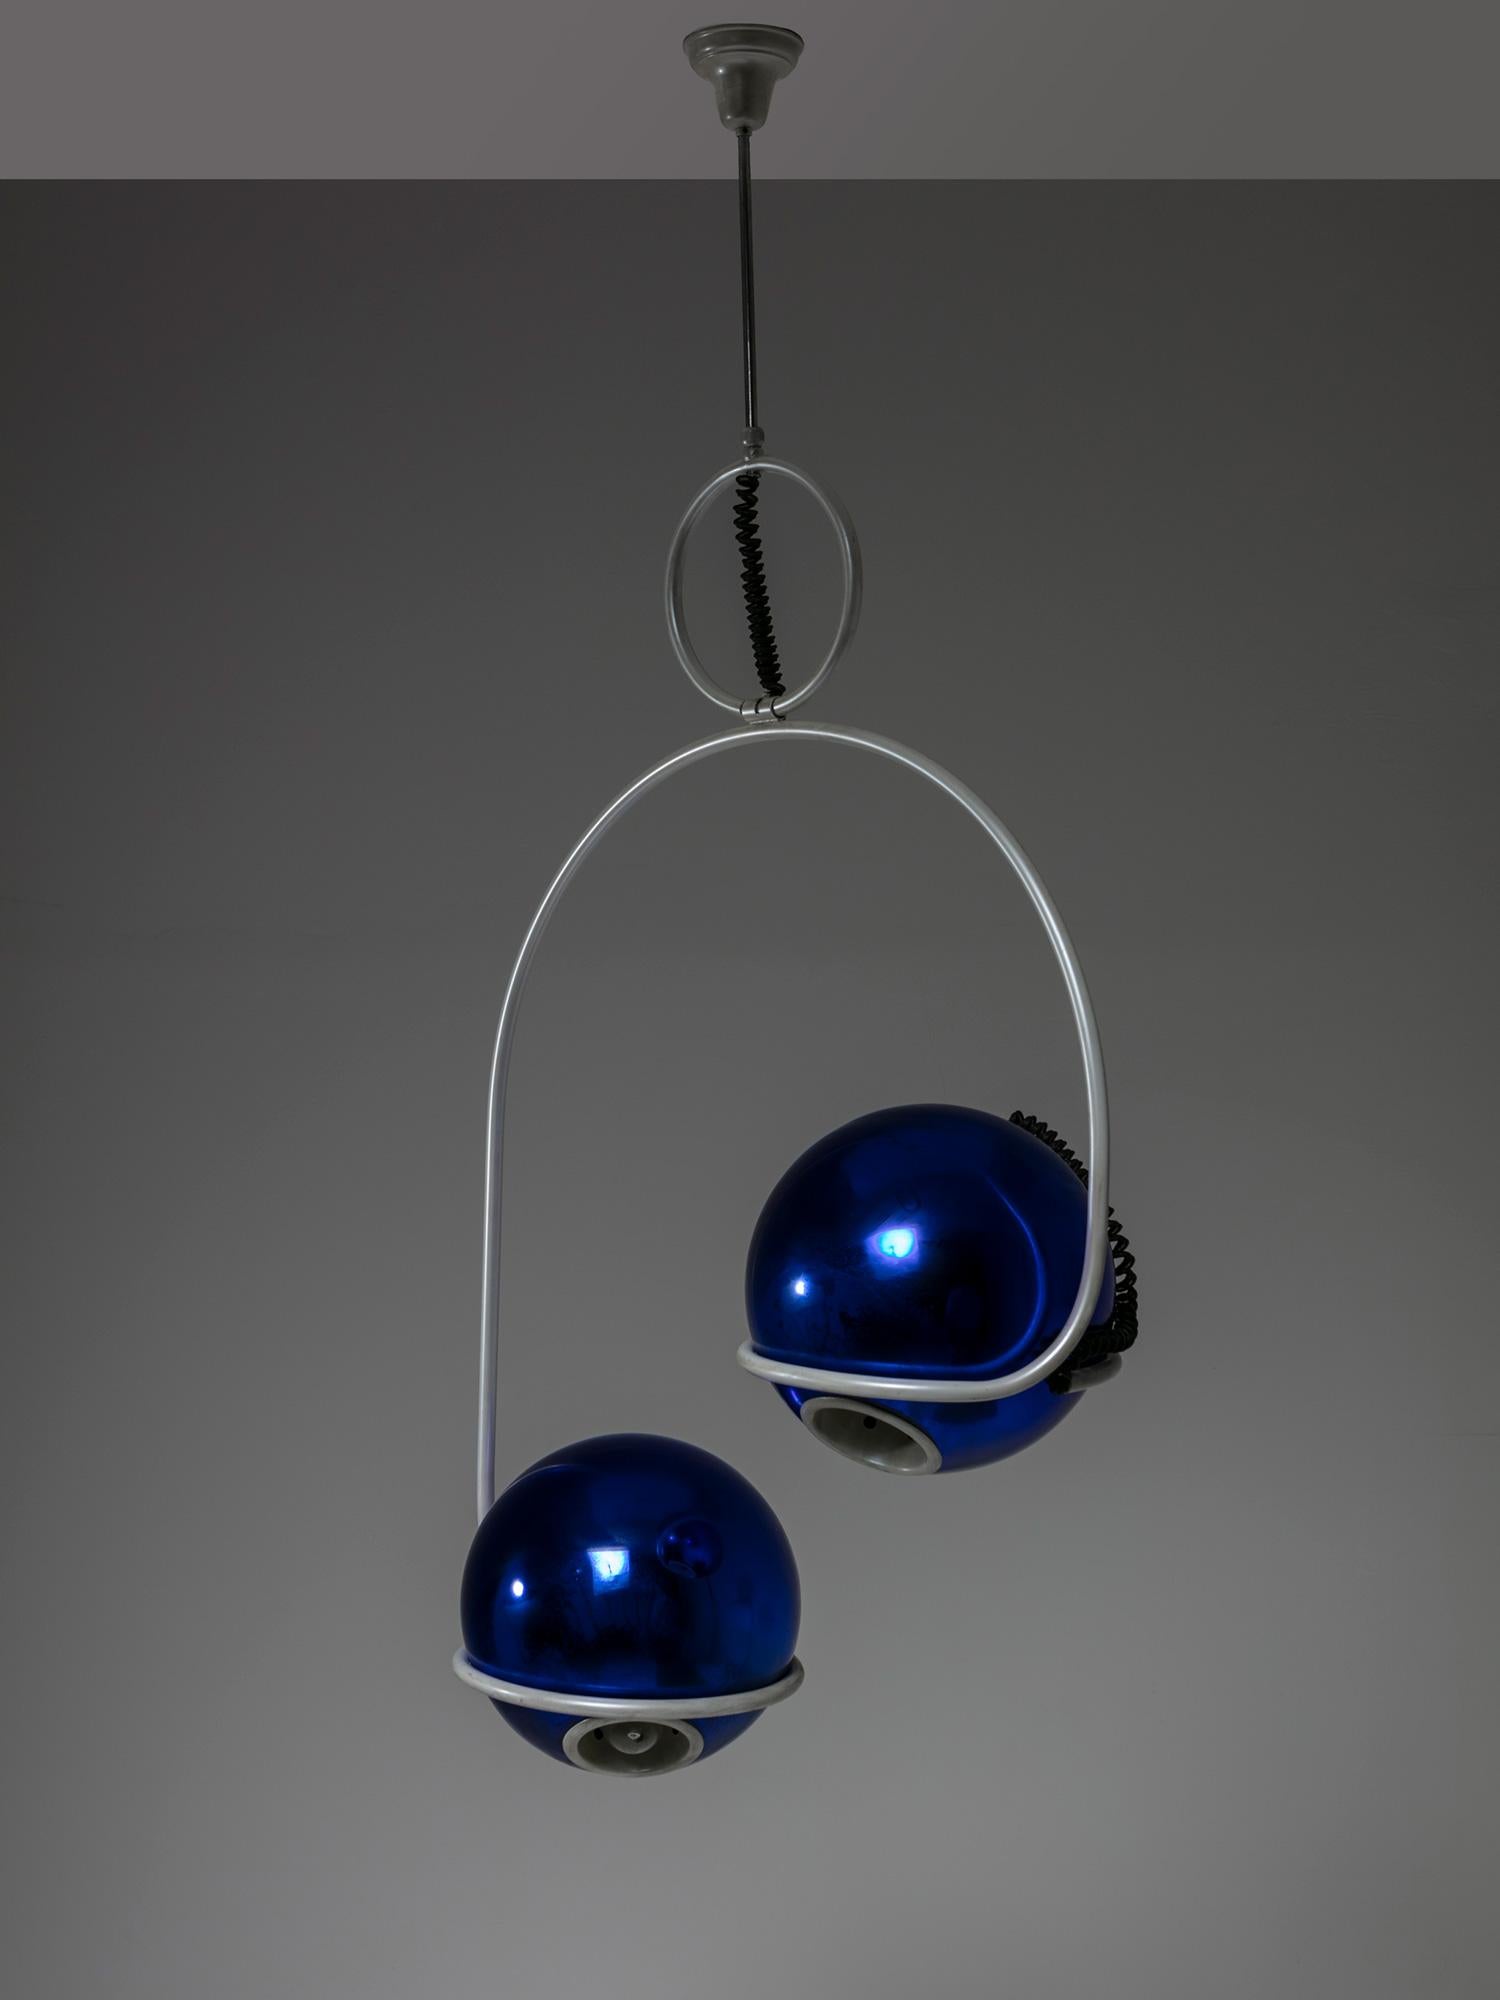 Large Italian 1970s chandelier in the style of Roberto Menghi.
Asymmetrical white lacquered frame hosts two blue mirrored glass shades.
These shades are laying on the round frame and can be freely adjustable.